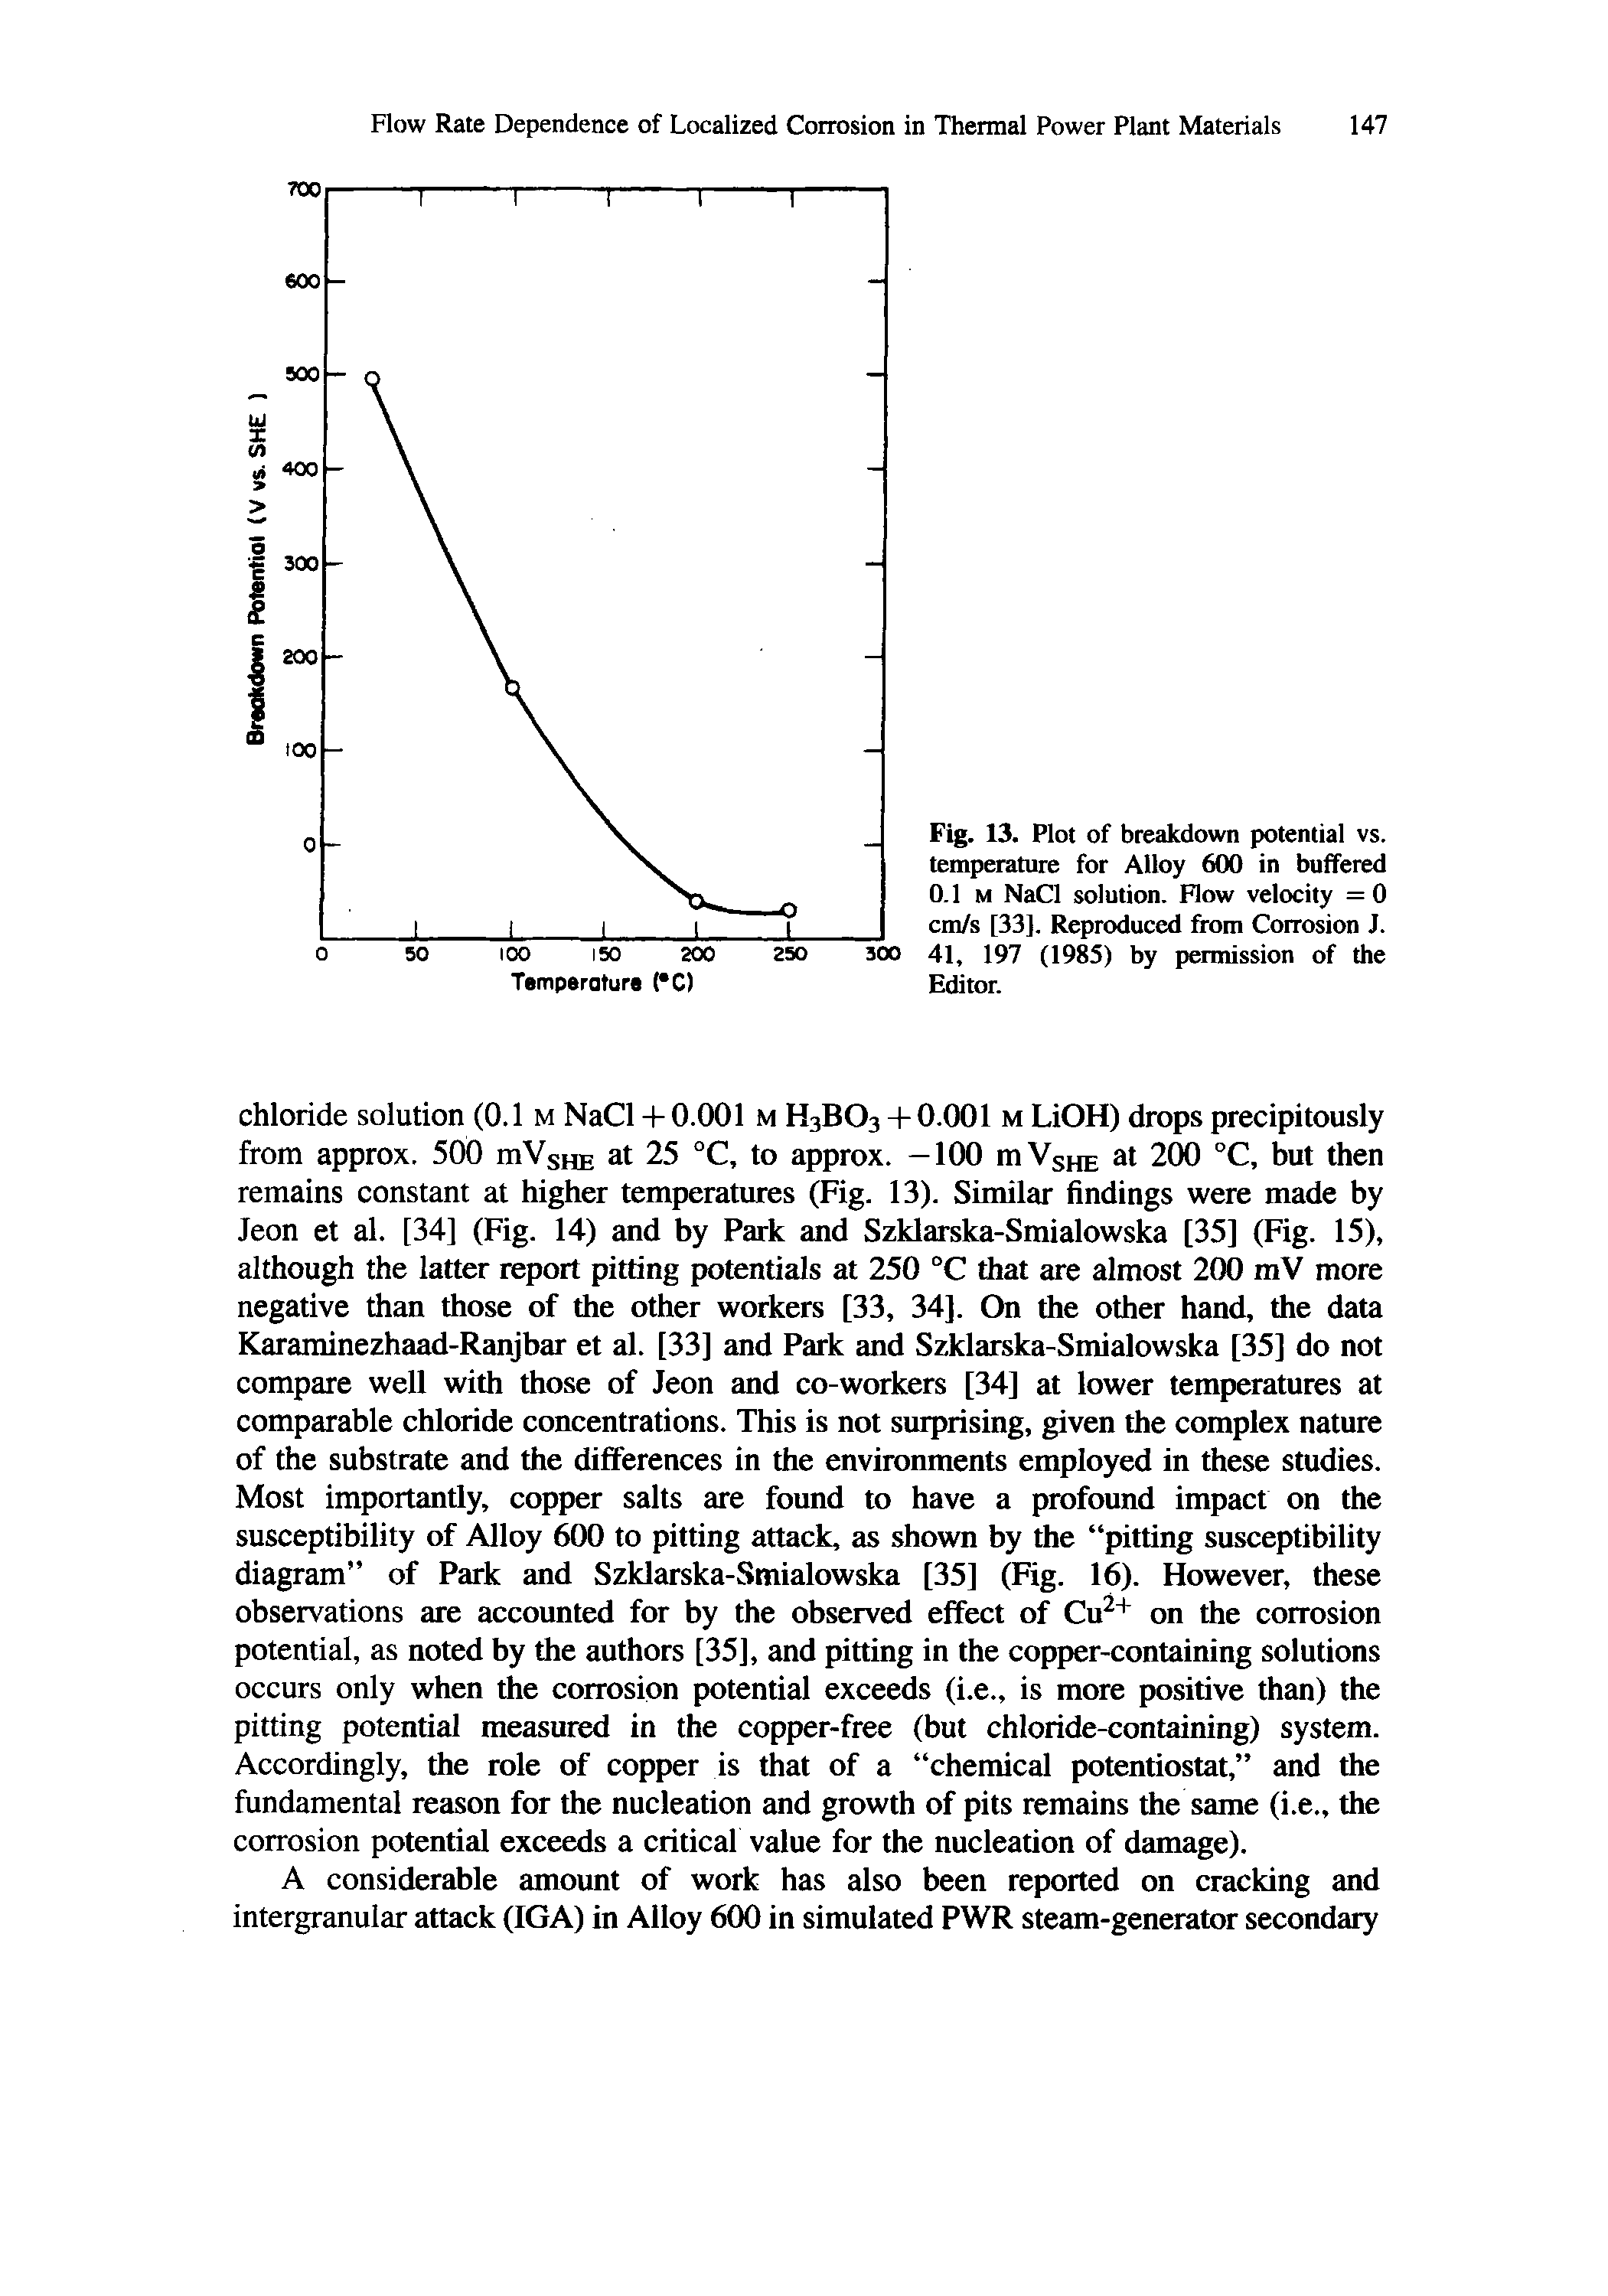 Fig. 13. Plot of breakdown potential vs. temperature for Alloy 600 in buffered 0.1 M NaCl solution. Flow velocity =0 cm/s [33]. Reproduced from Corrosion J. 41, 197 (1985) by permission of the Editor.